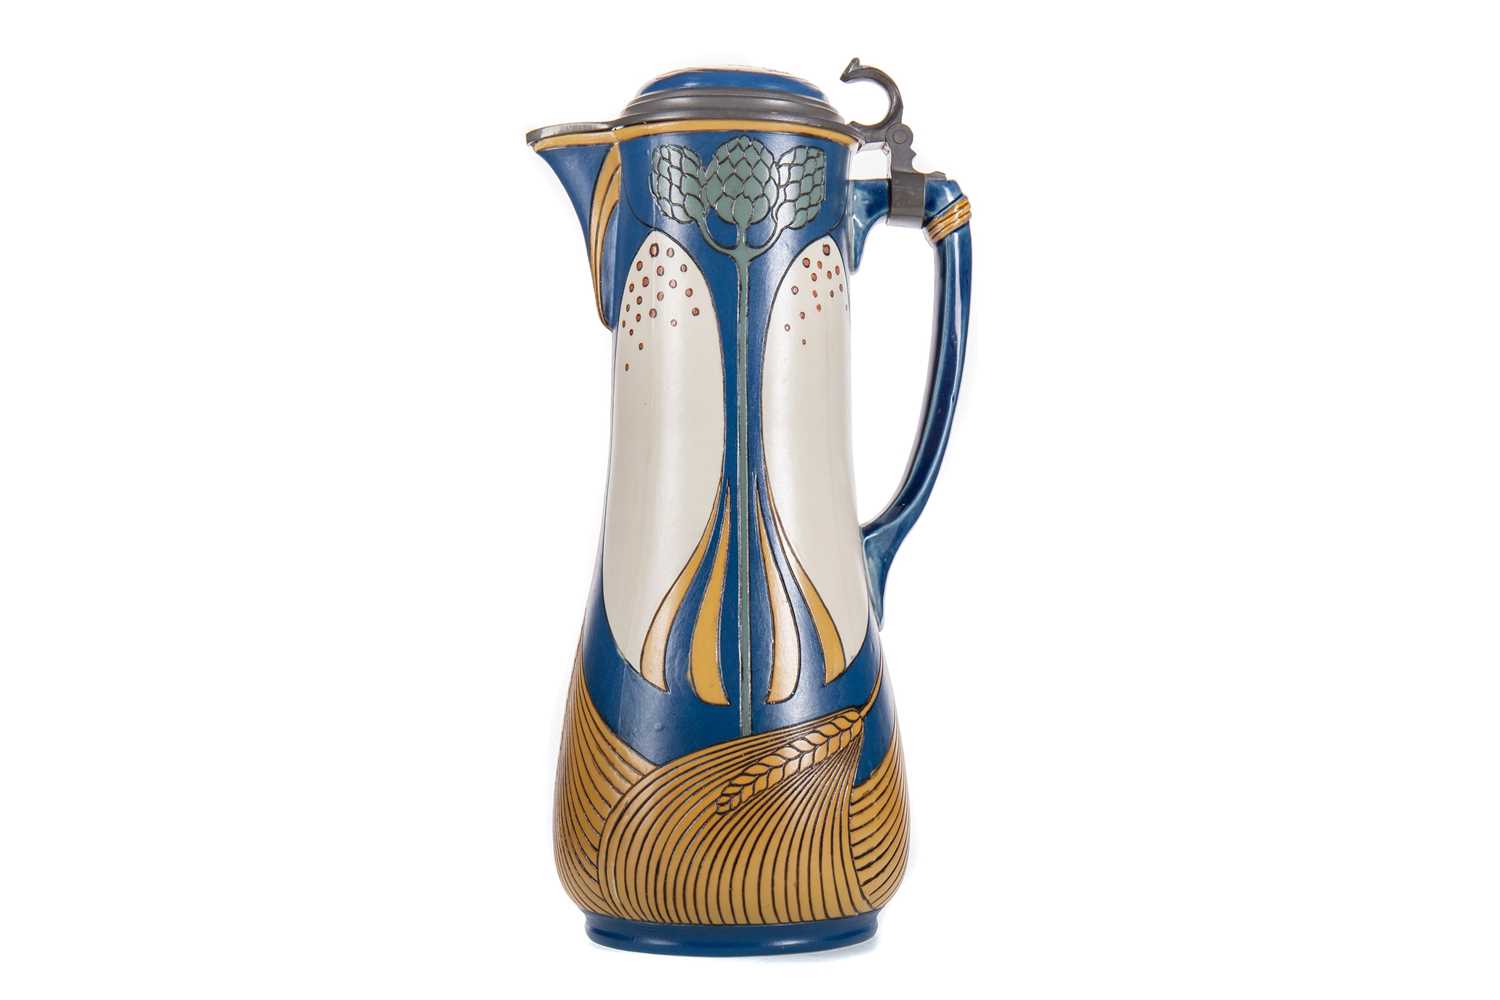 VILLEROY & BOCH, SECCESSIONIST BEER JUG LATE 19TH / EARLY 20TH CENTURY - Image 2 of 2